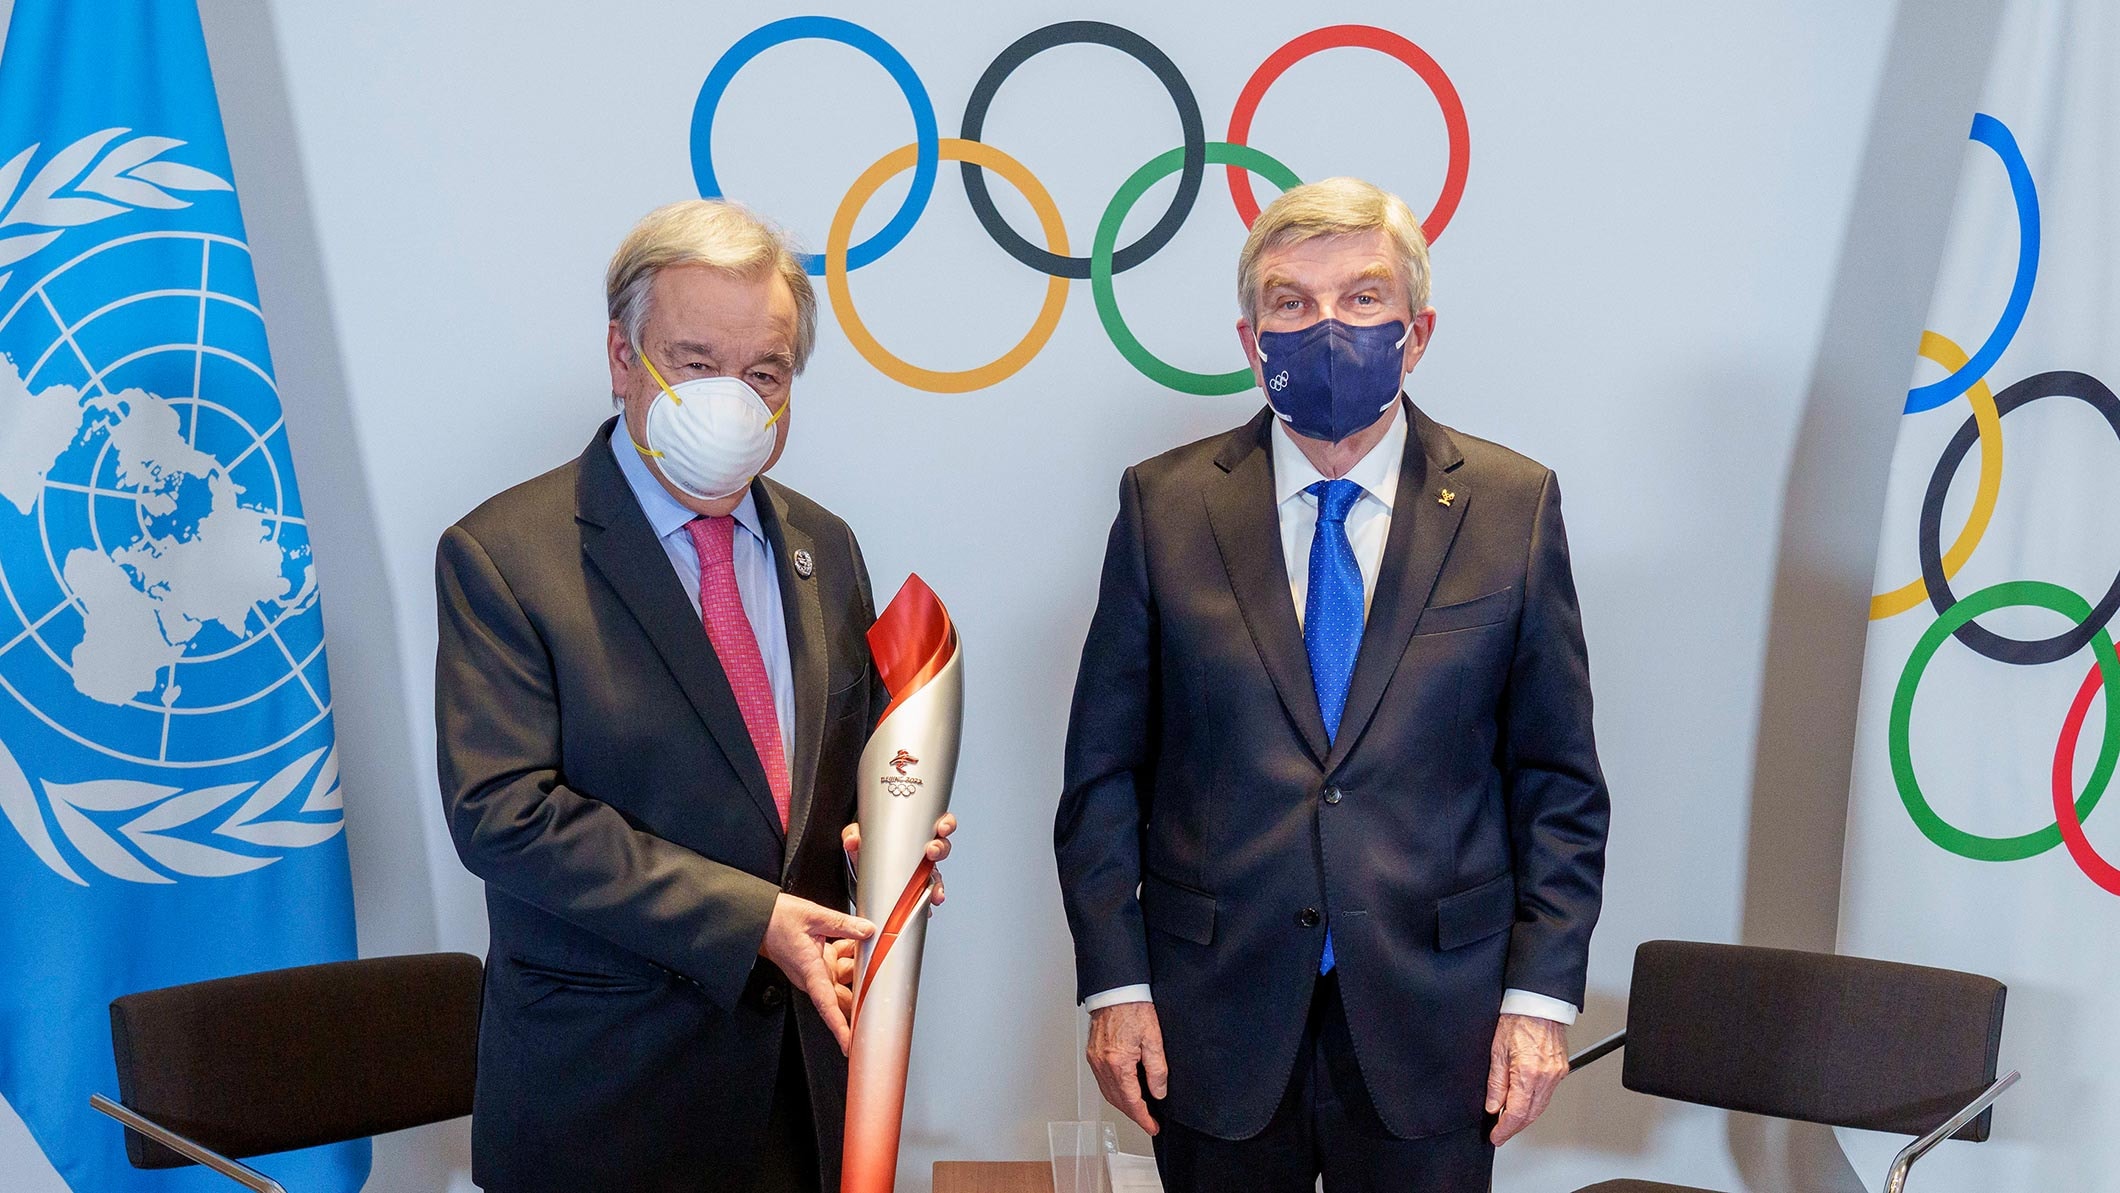 IOC President Thomas Bach and United Nations Secretary-General António Guterres